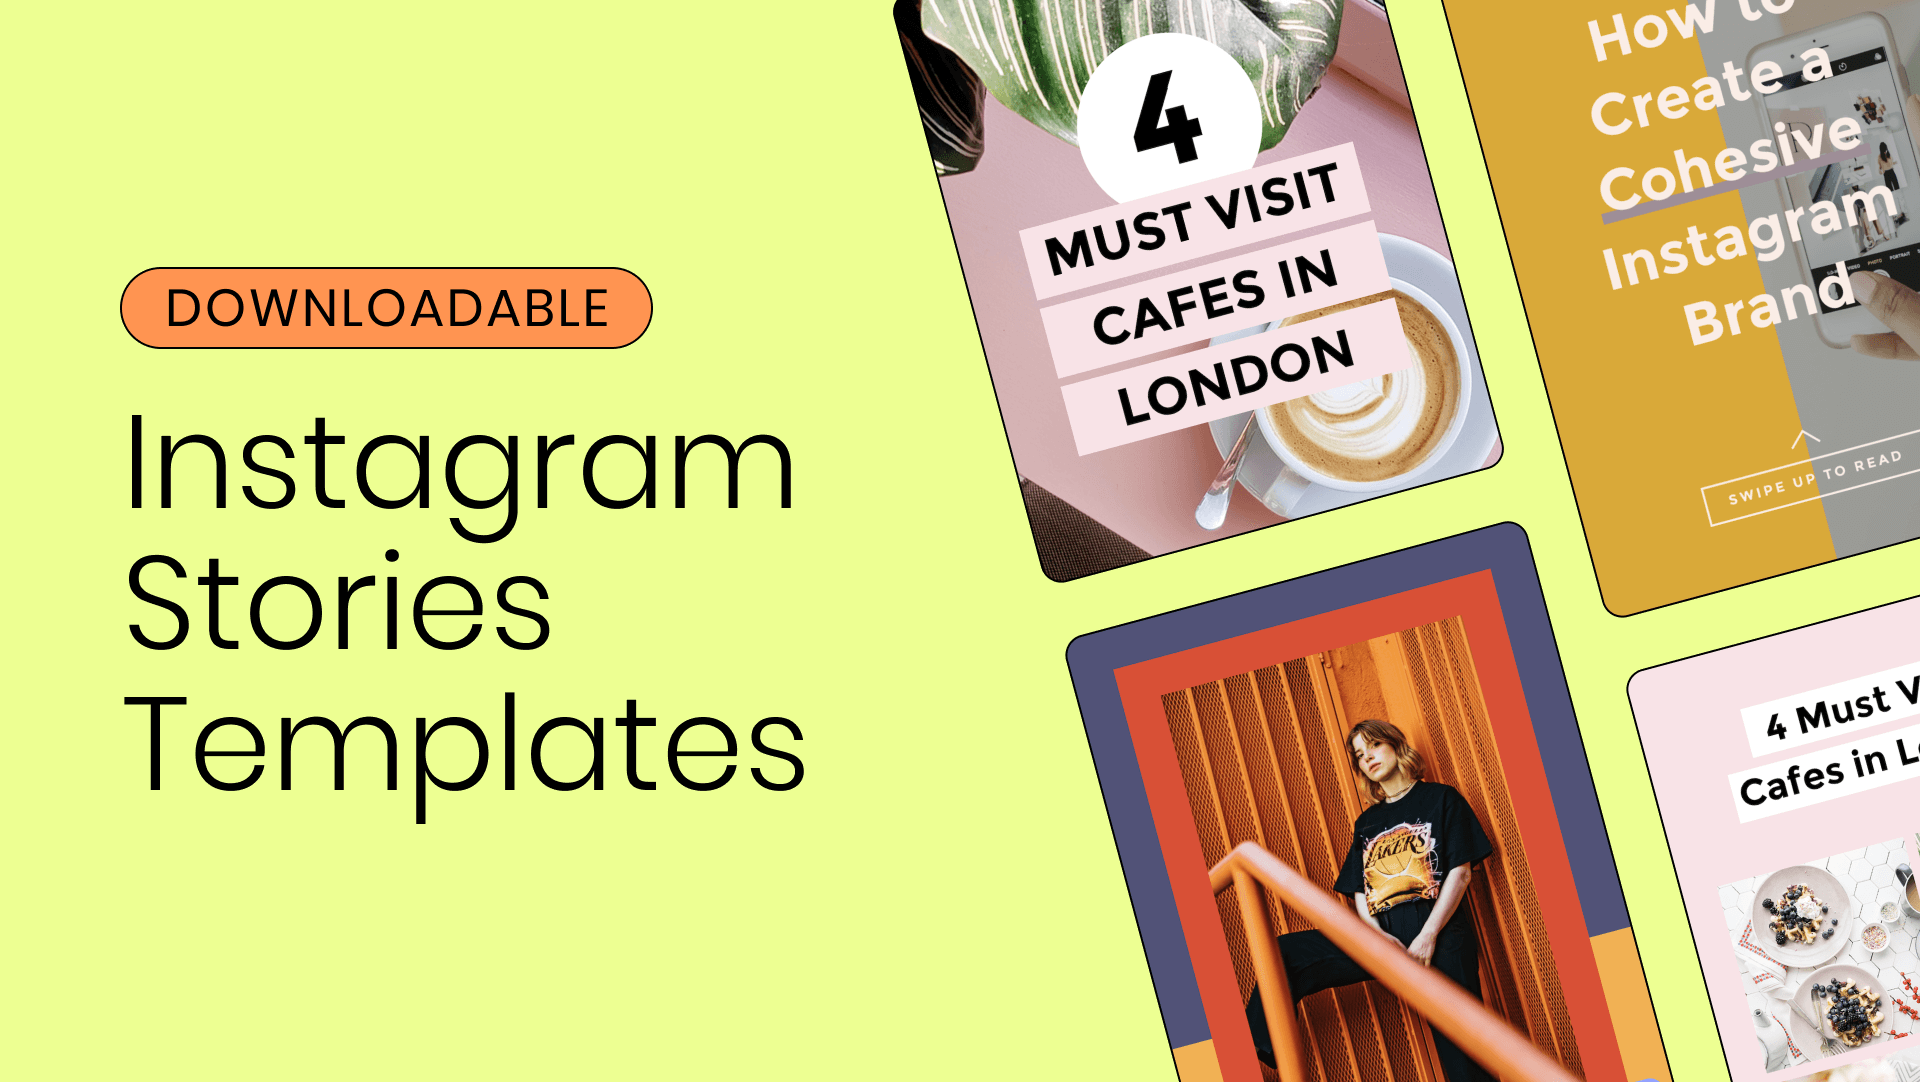 Thumbnail image showing the title Instagram stories templates, with a collage of Instagram stories image examples